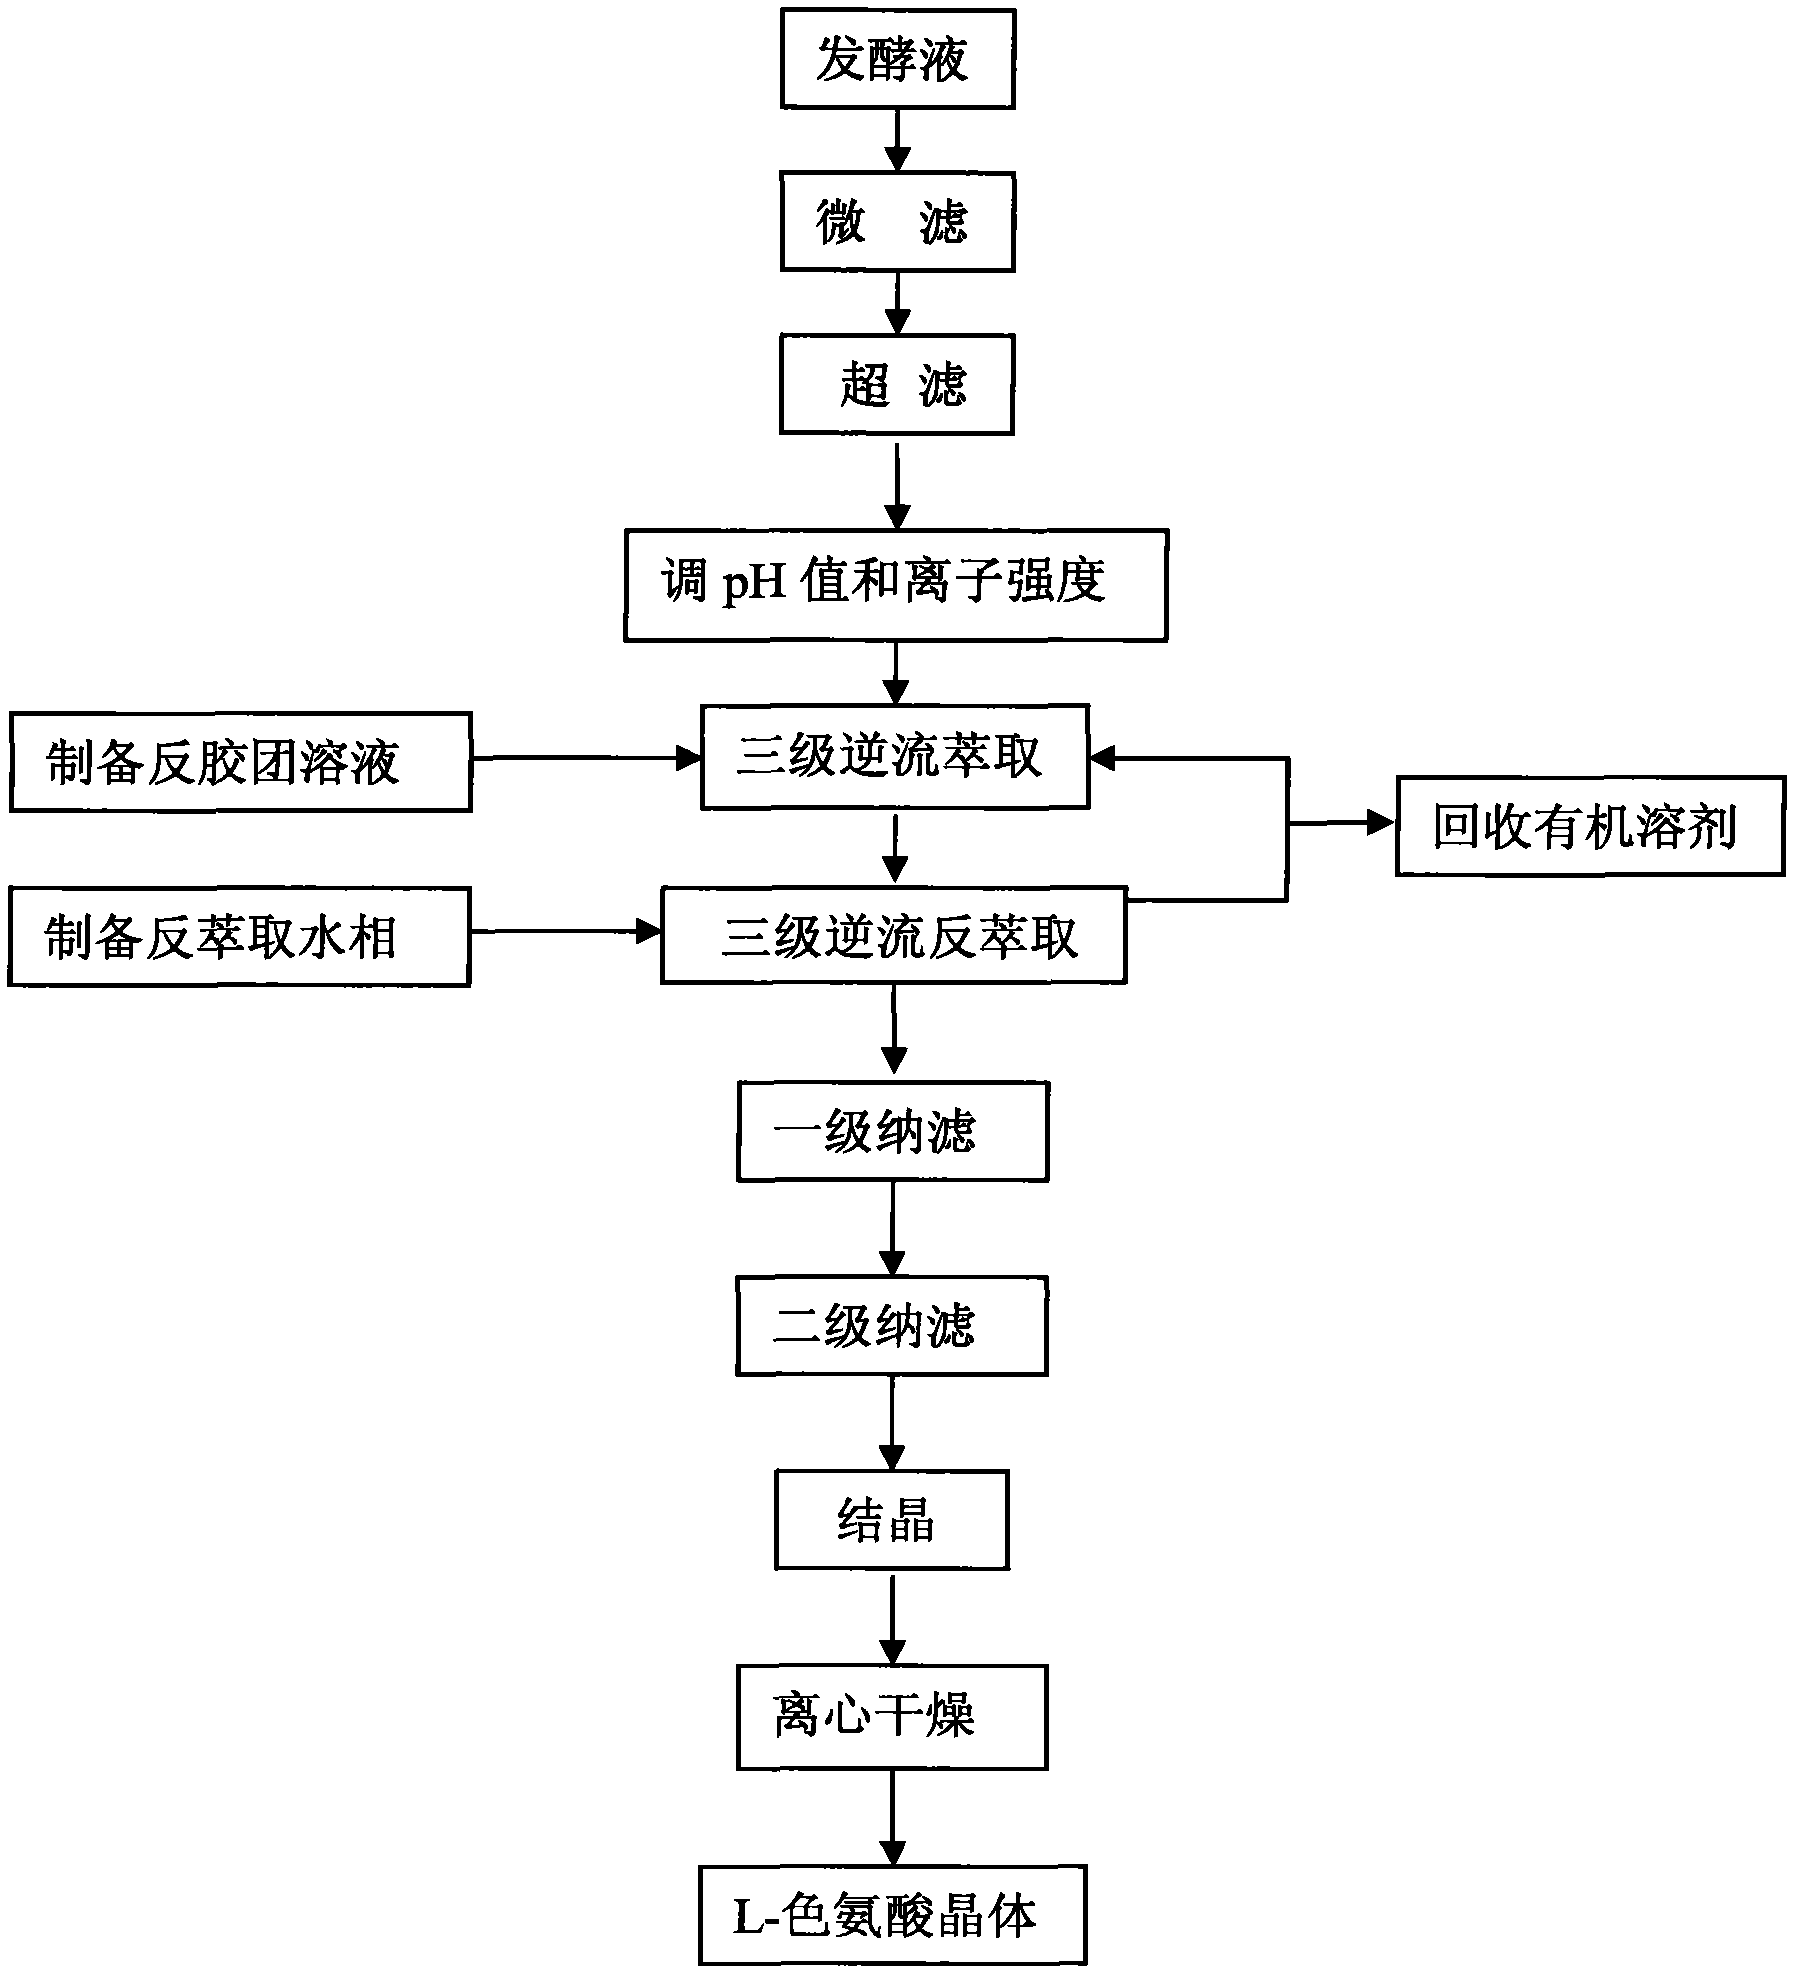 Separation and purification process for L-tryptophane